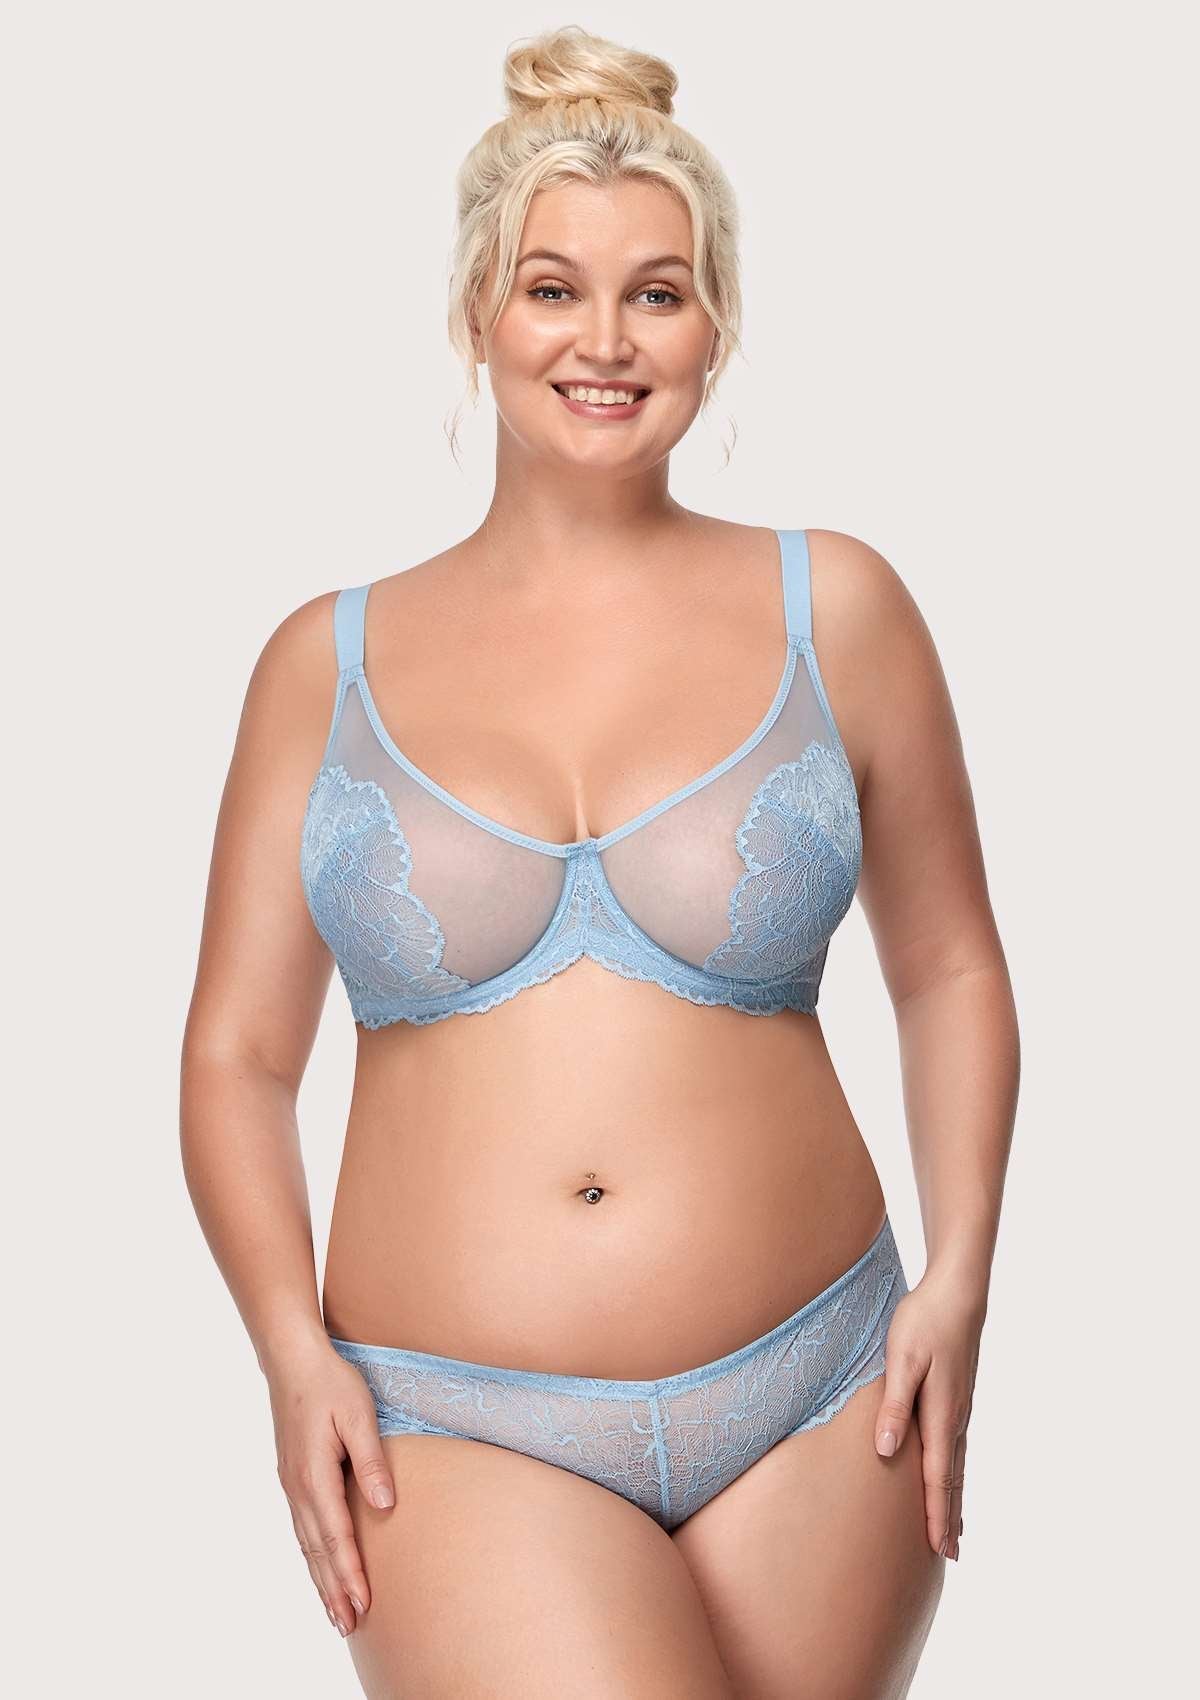 HSIA Blossom Full Coverage Supportive Unlined Underwire Bra Set - Storm Blue / 42 / D